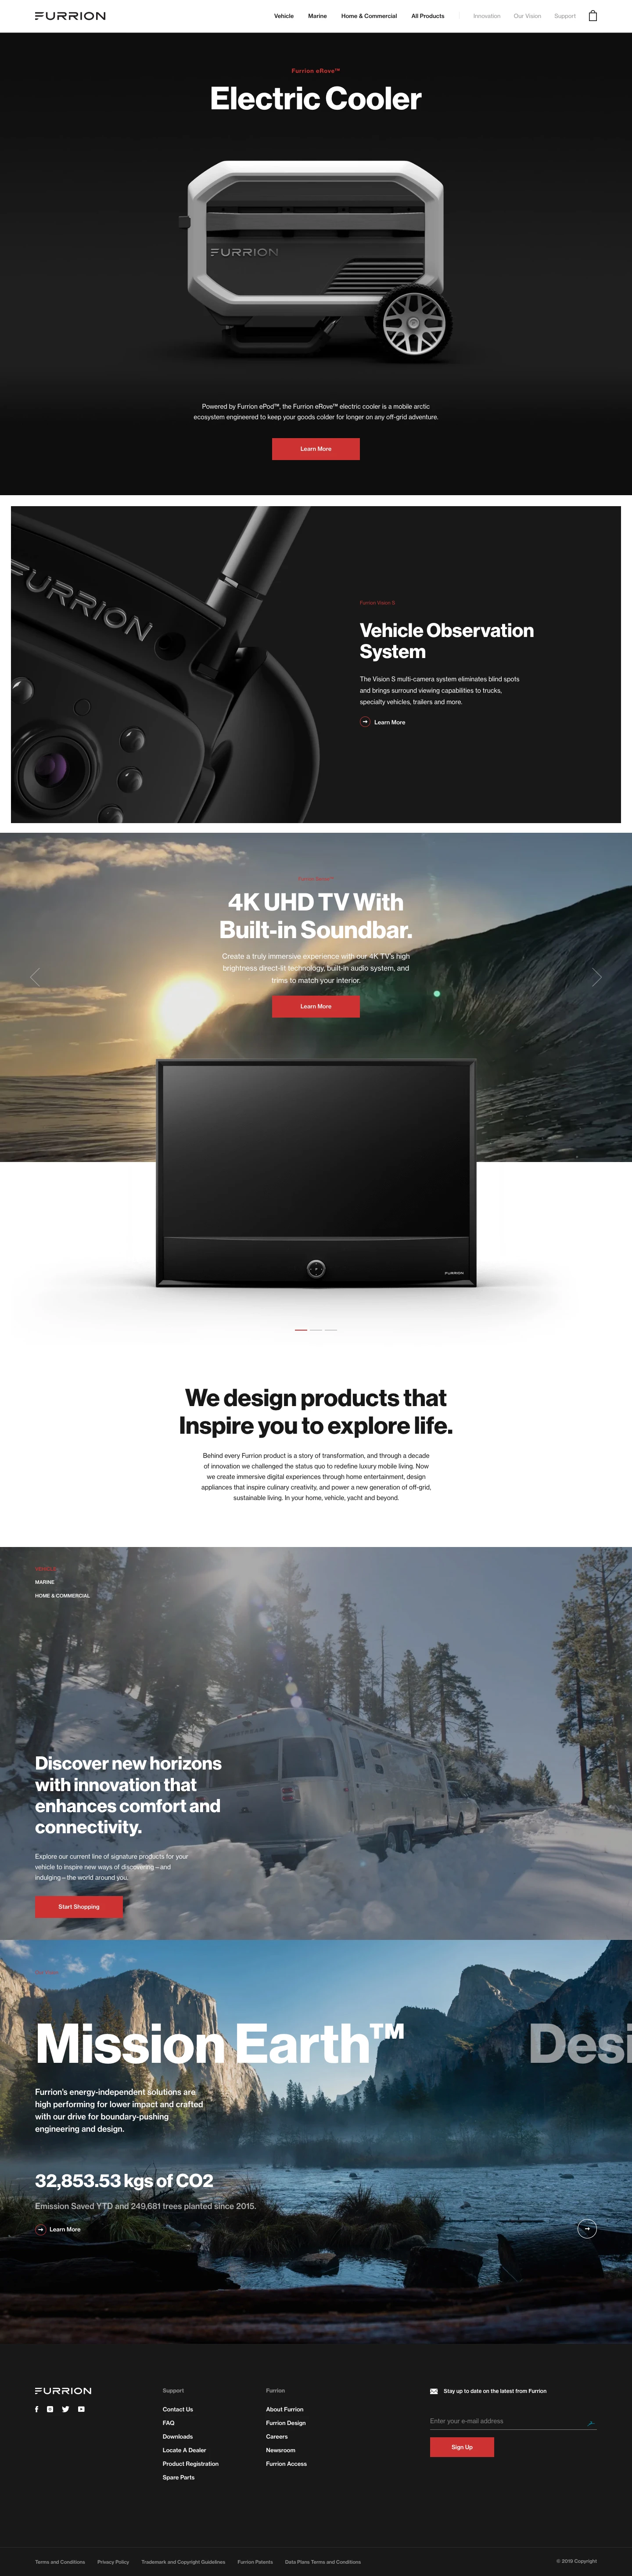 Furrion Landing Page Example: A wide range of modern and stylish cooktops, entertainment systems, speakers, LED TVs and power cables and connectors for home, RVs and yachts.